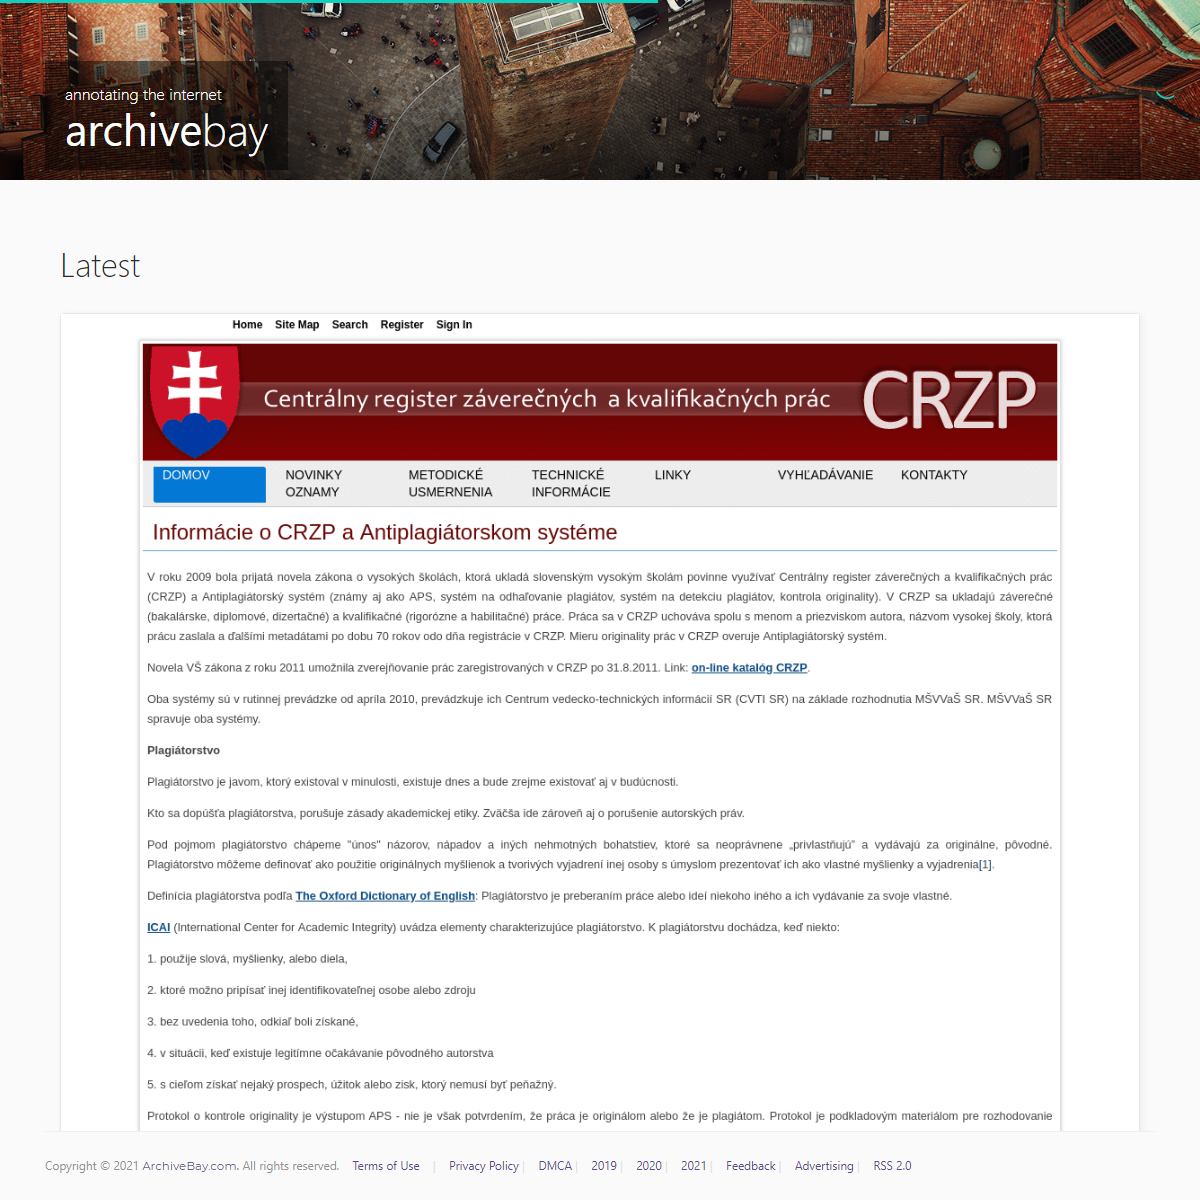 A complete backup of https://www.archivebay.com/site/crzp.sk--2019-10-12__17-49-00